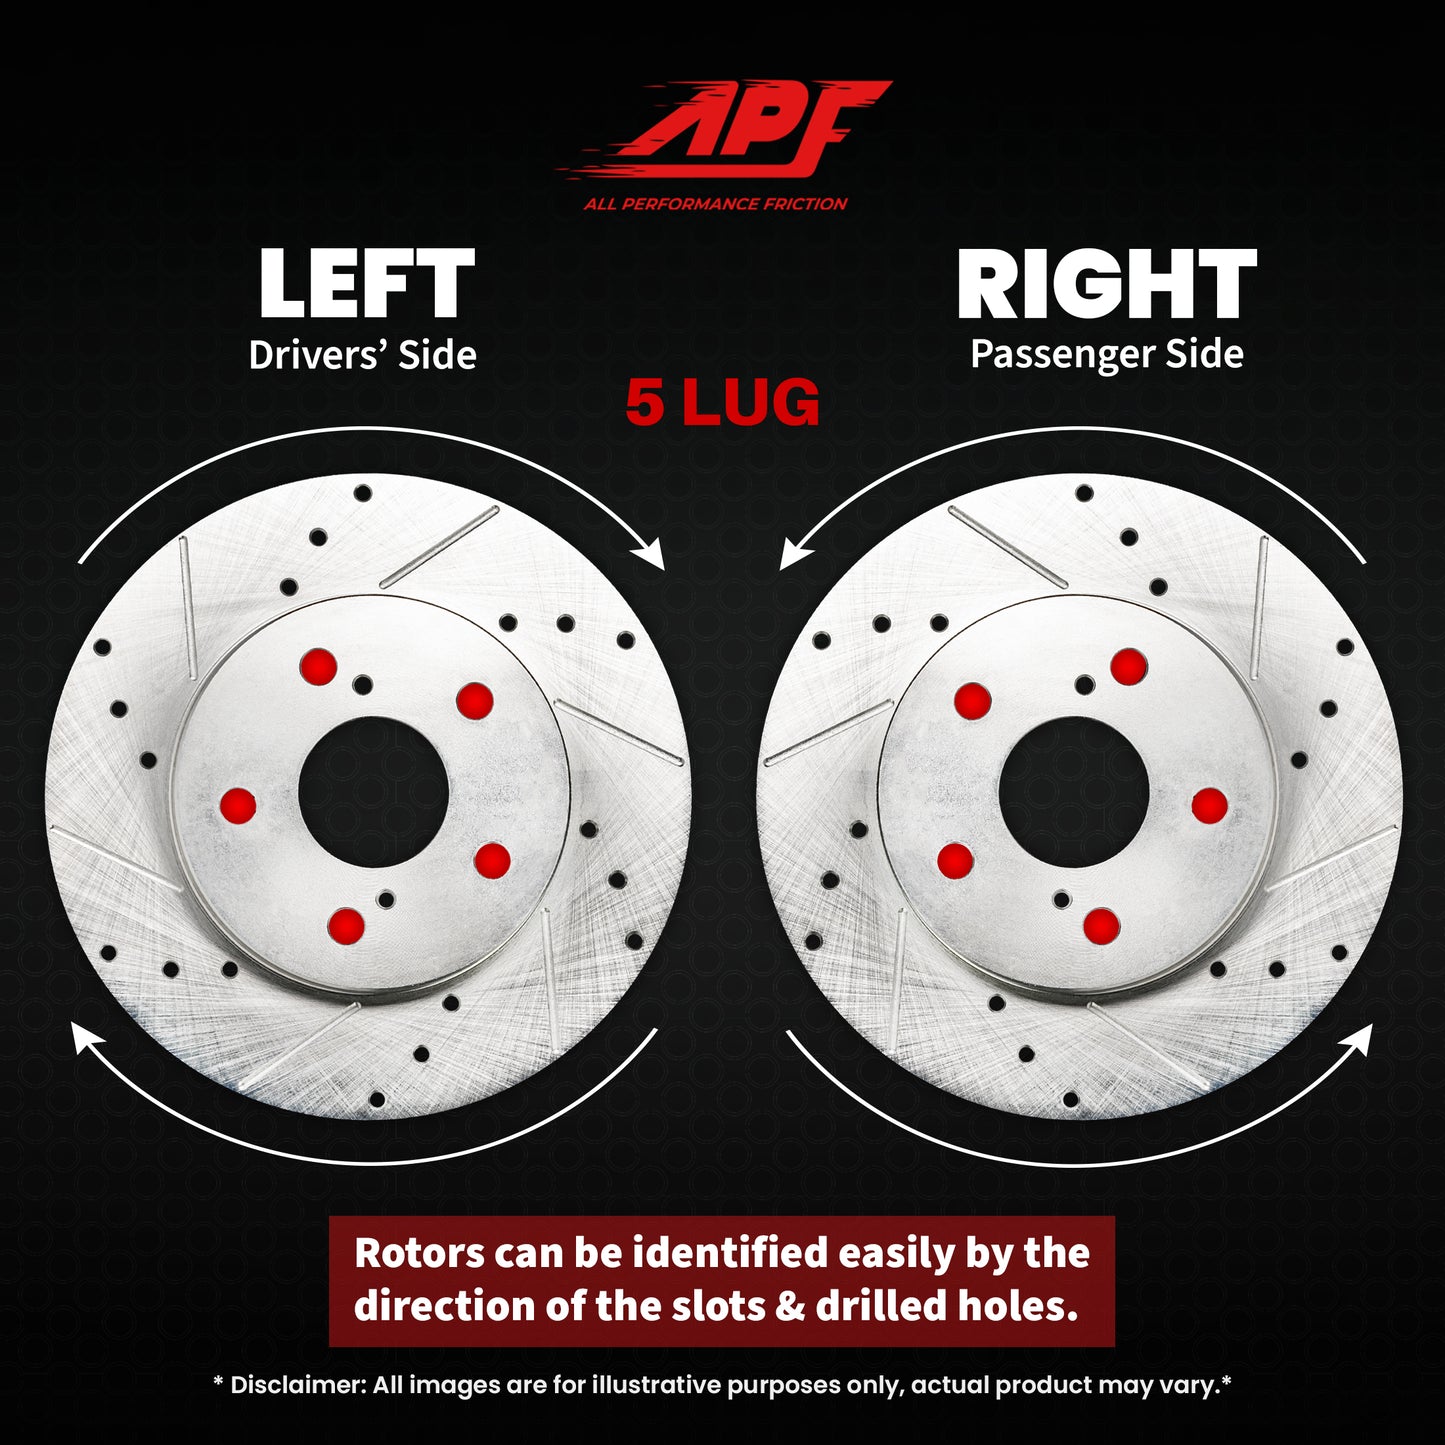 APF All Performance Friction Front Rotors compatible with Nissan Sentra 2007-2012 Zinc Drilled Slotted Rotors | $125.39